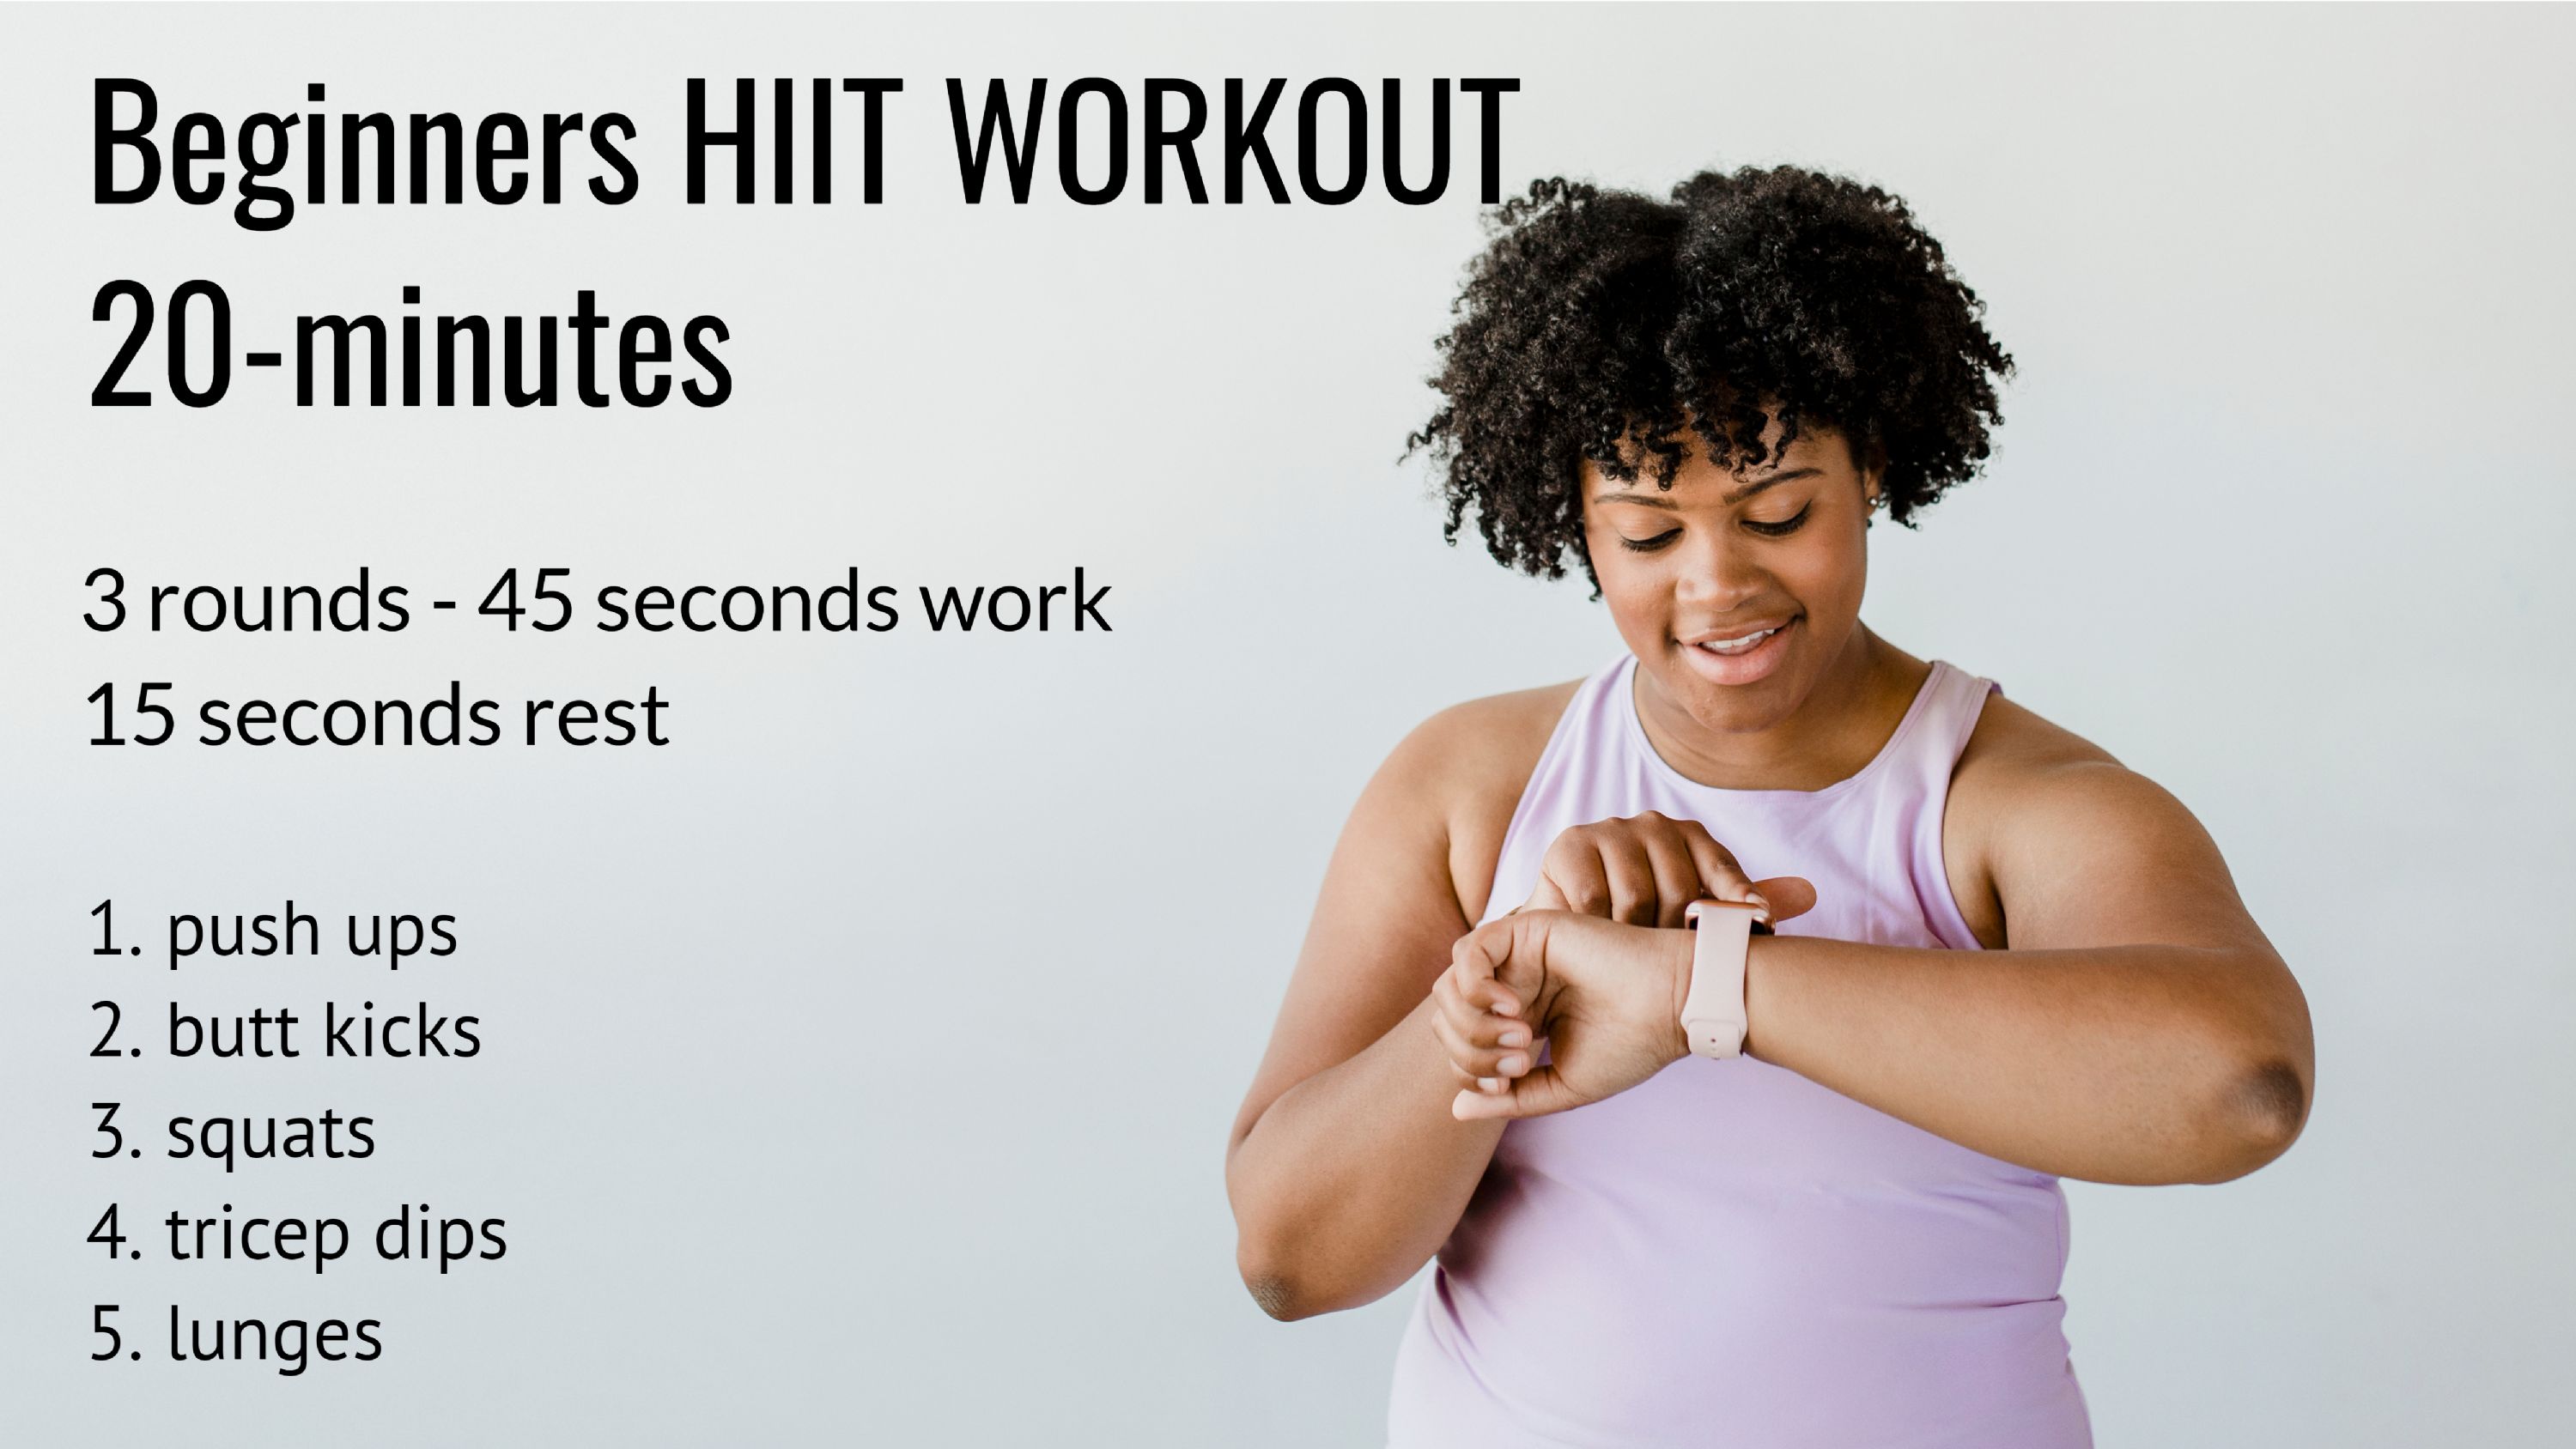 Beginners HIIT workout